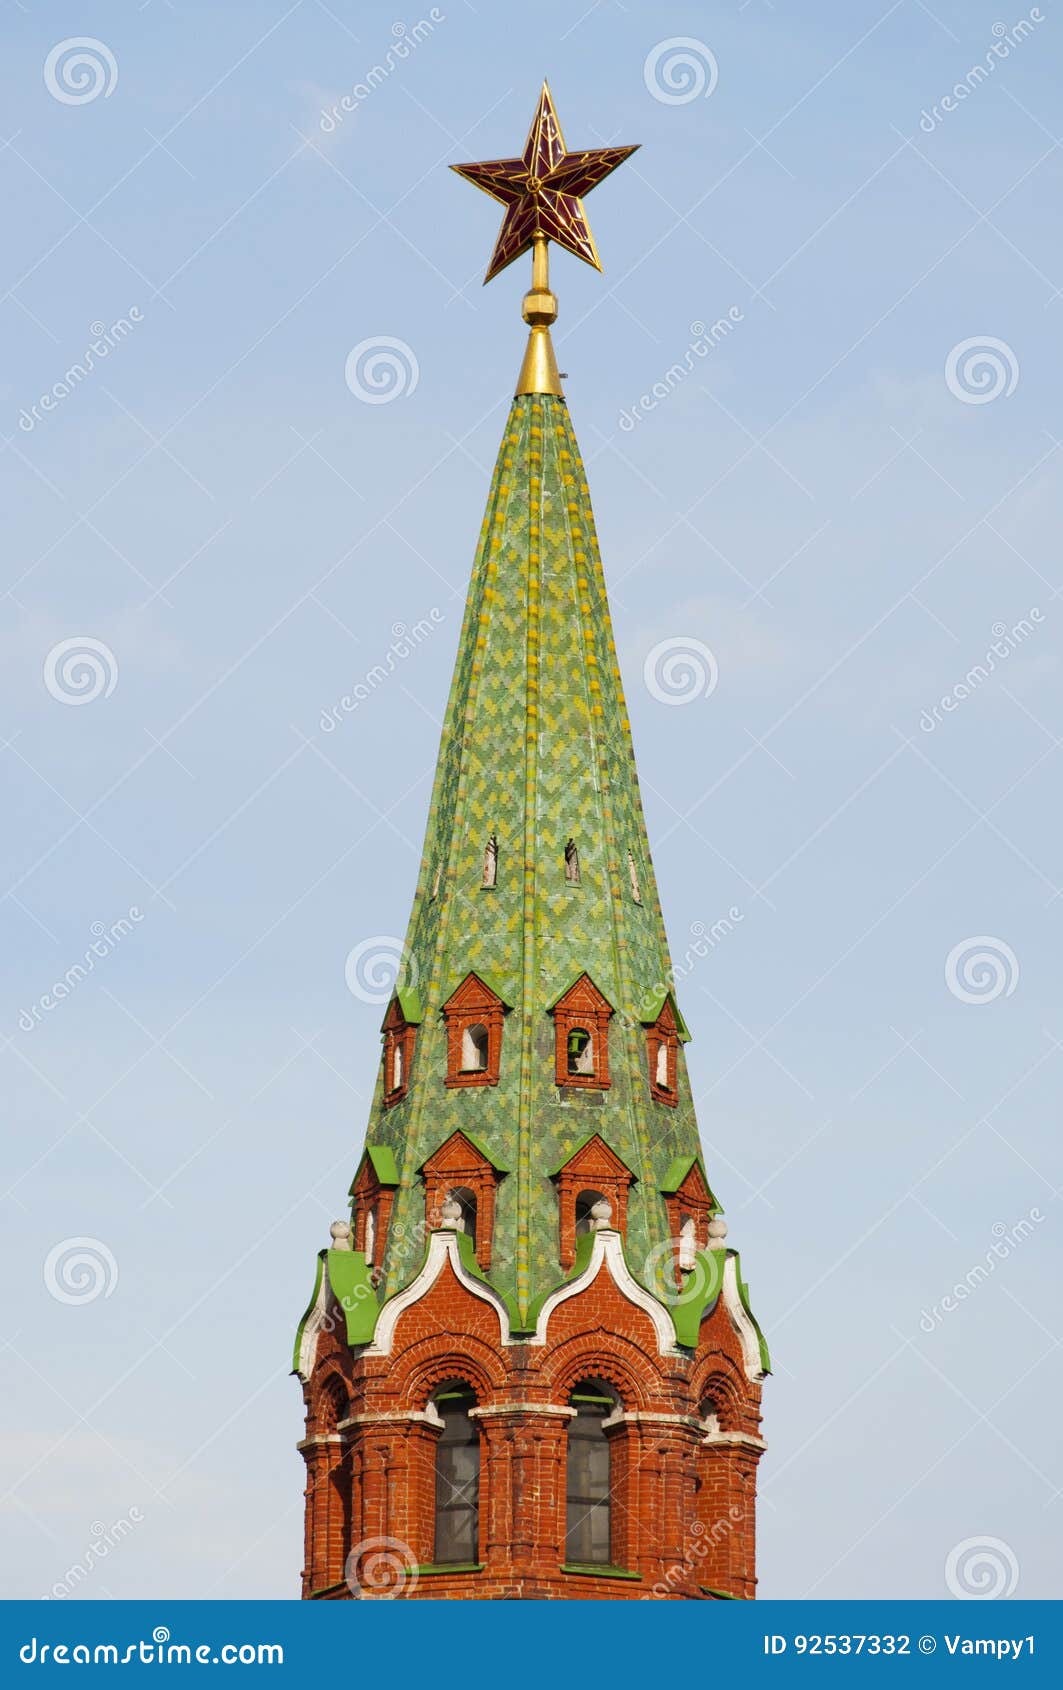 the kremlin, star, moscow, russian federal city, russian federation, russia